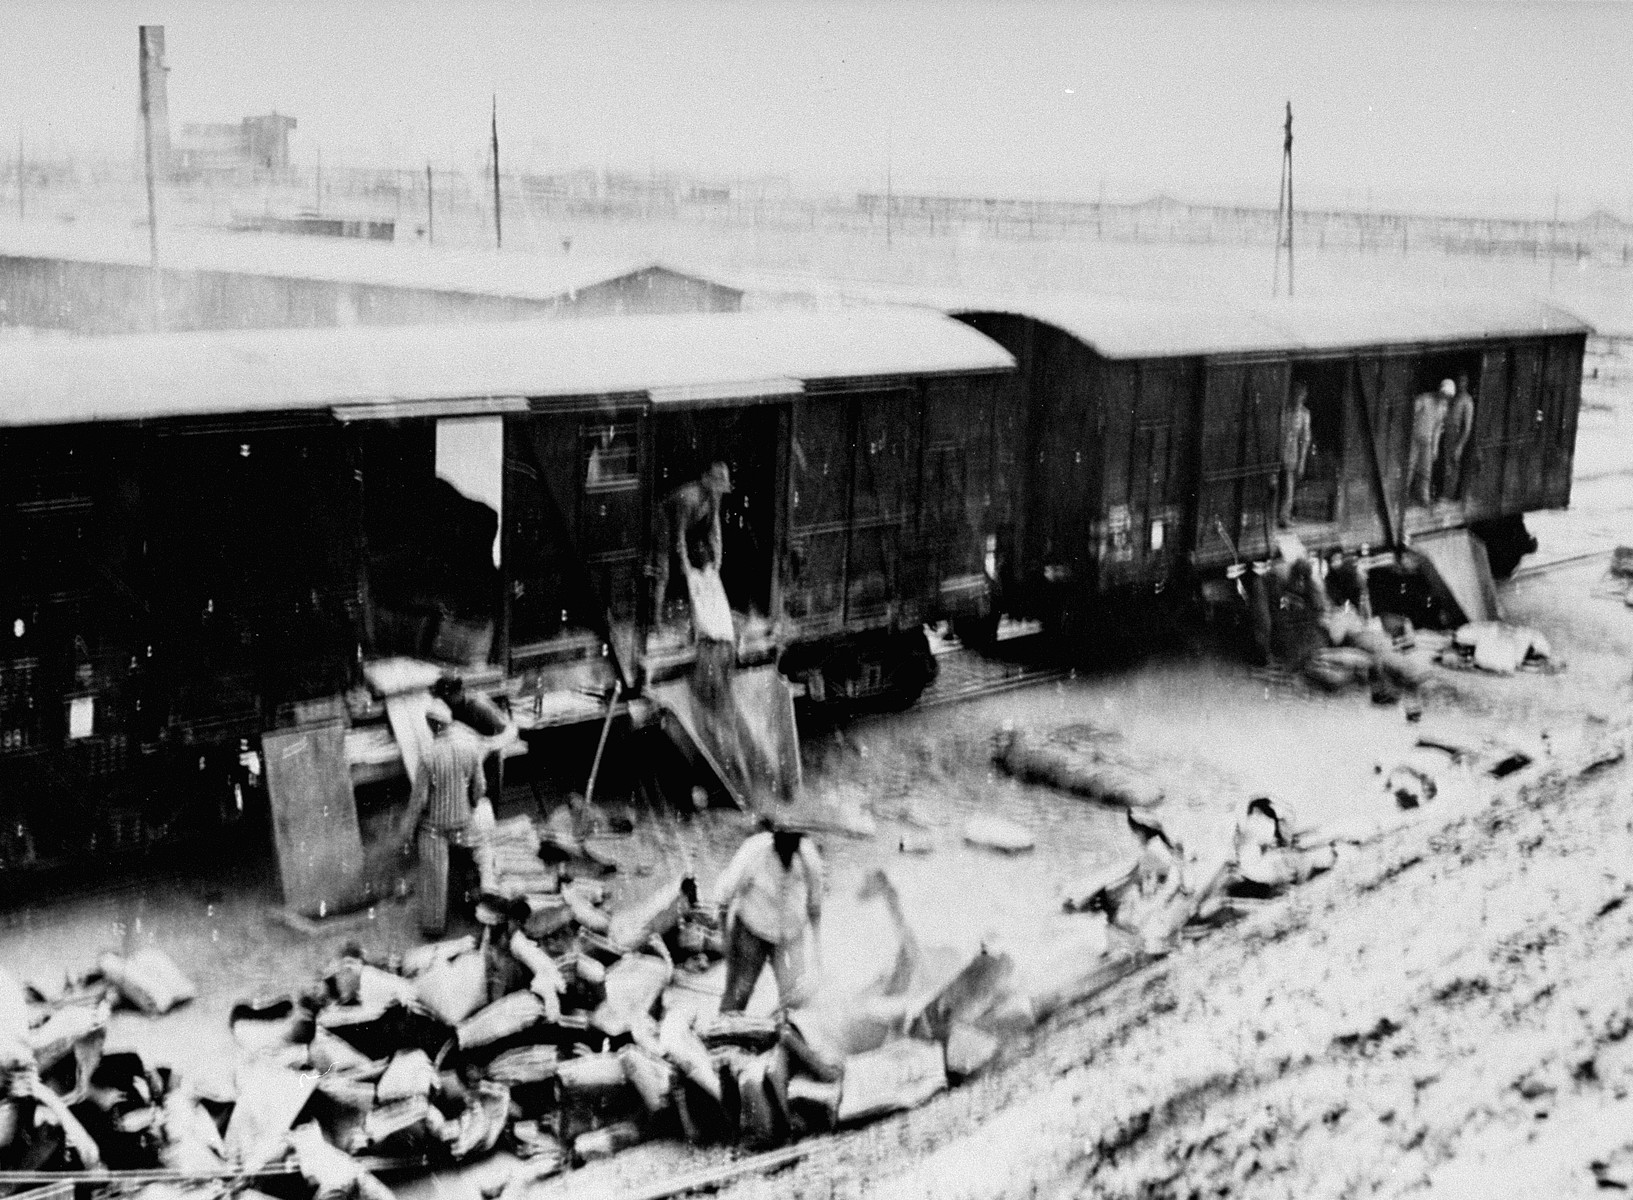 Auschwitz prisoners unload railcars containing cement at the I.G. Farben factory in Auschwitz-Monowitz.

This photograph was used as evidence at the I.G. Farben trial in Nuremberg.

The original caption reads: "Ambros No. 10.  An original photo made in Auschwitz representing the concrete factory I F 523, where the cement cars are being unloaded."